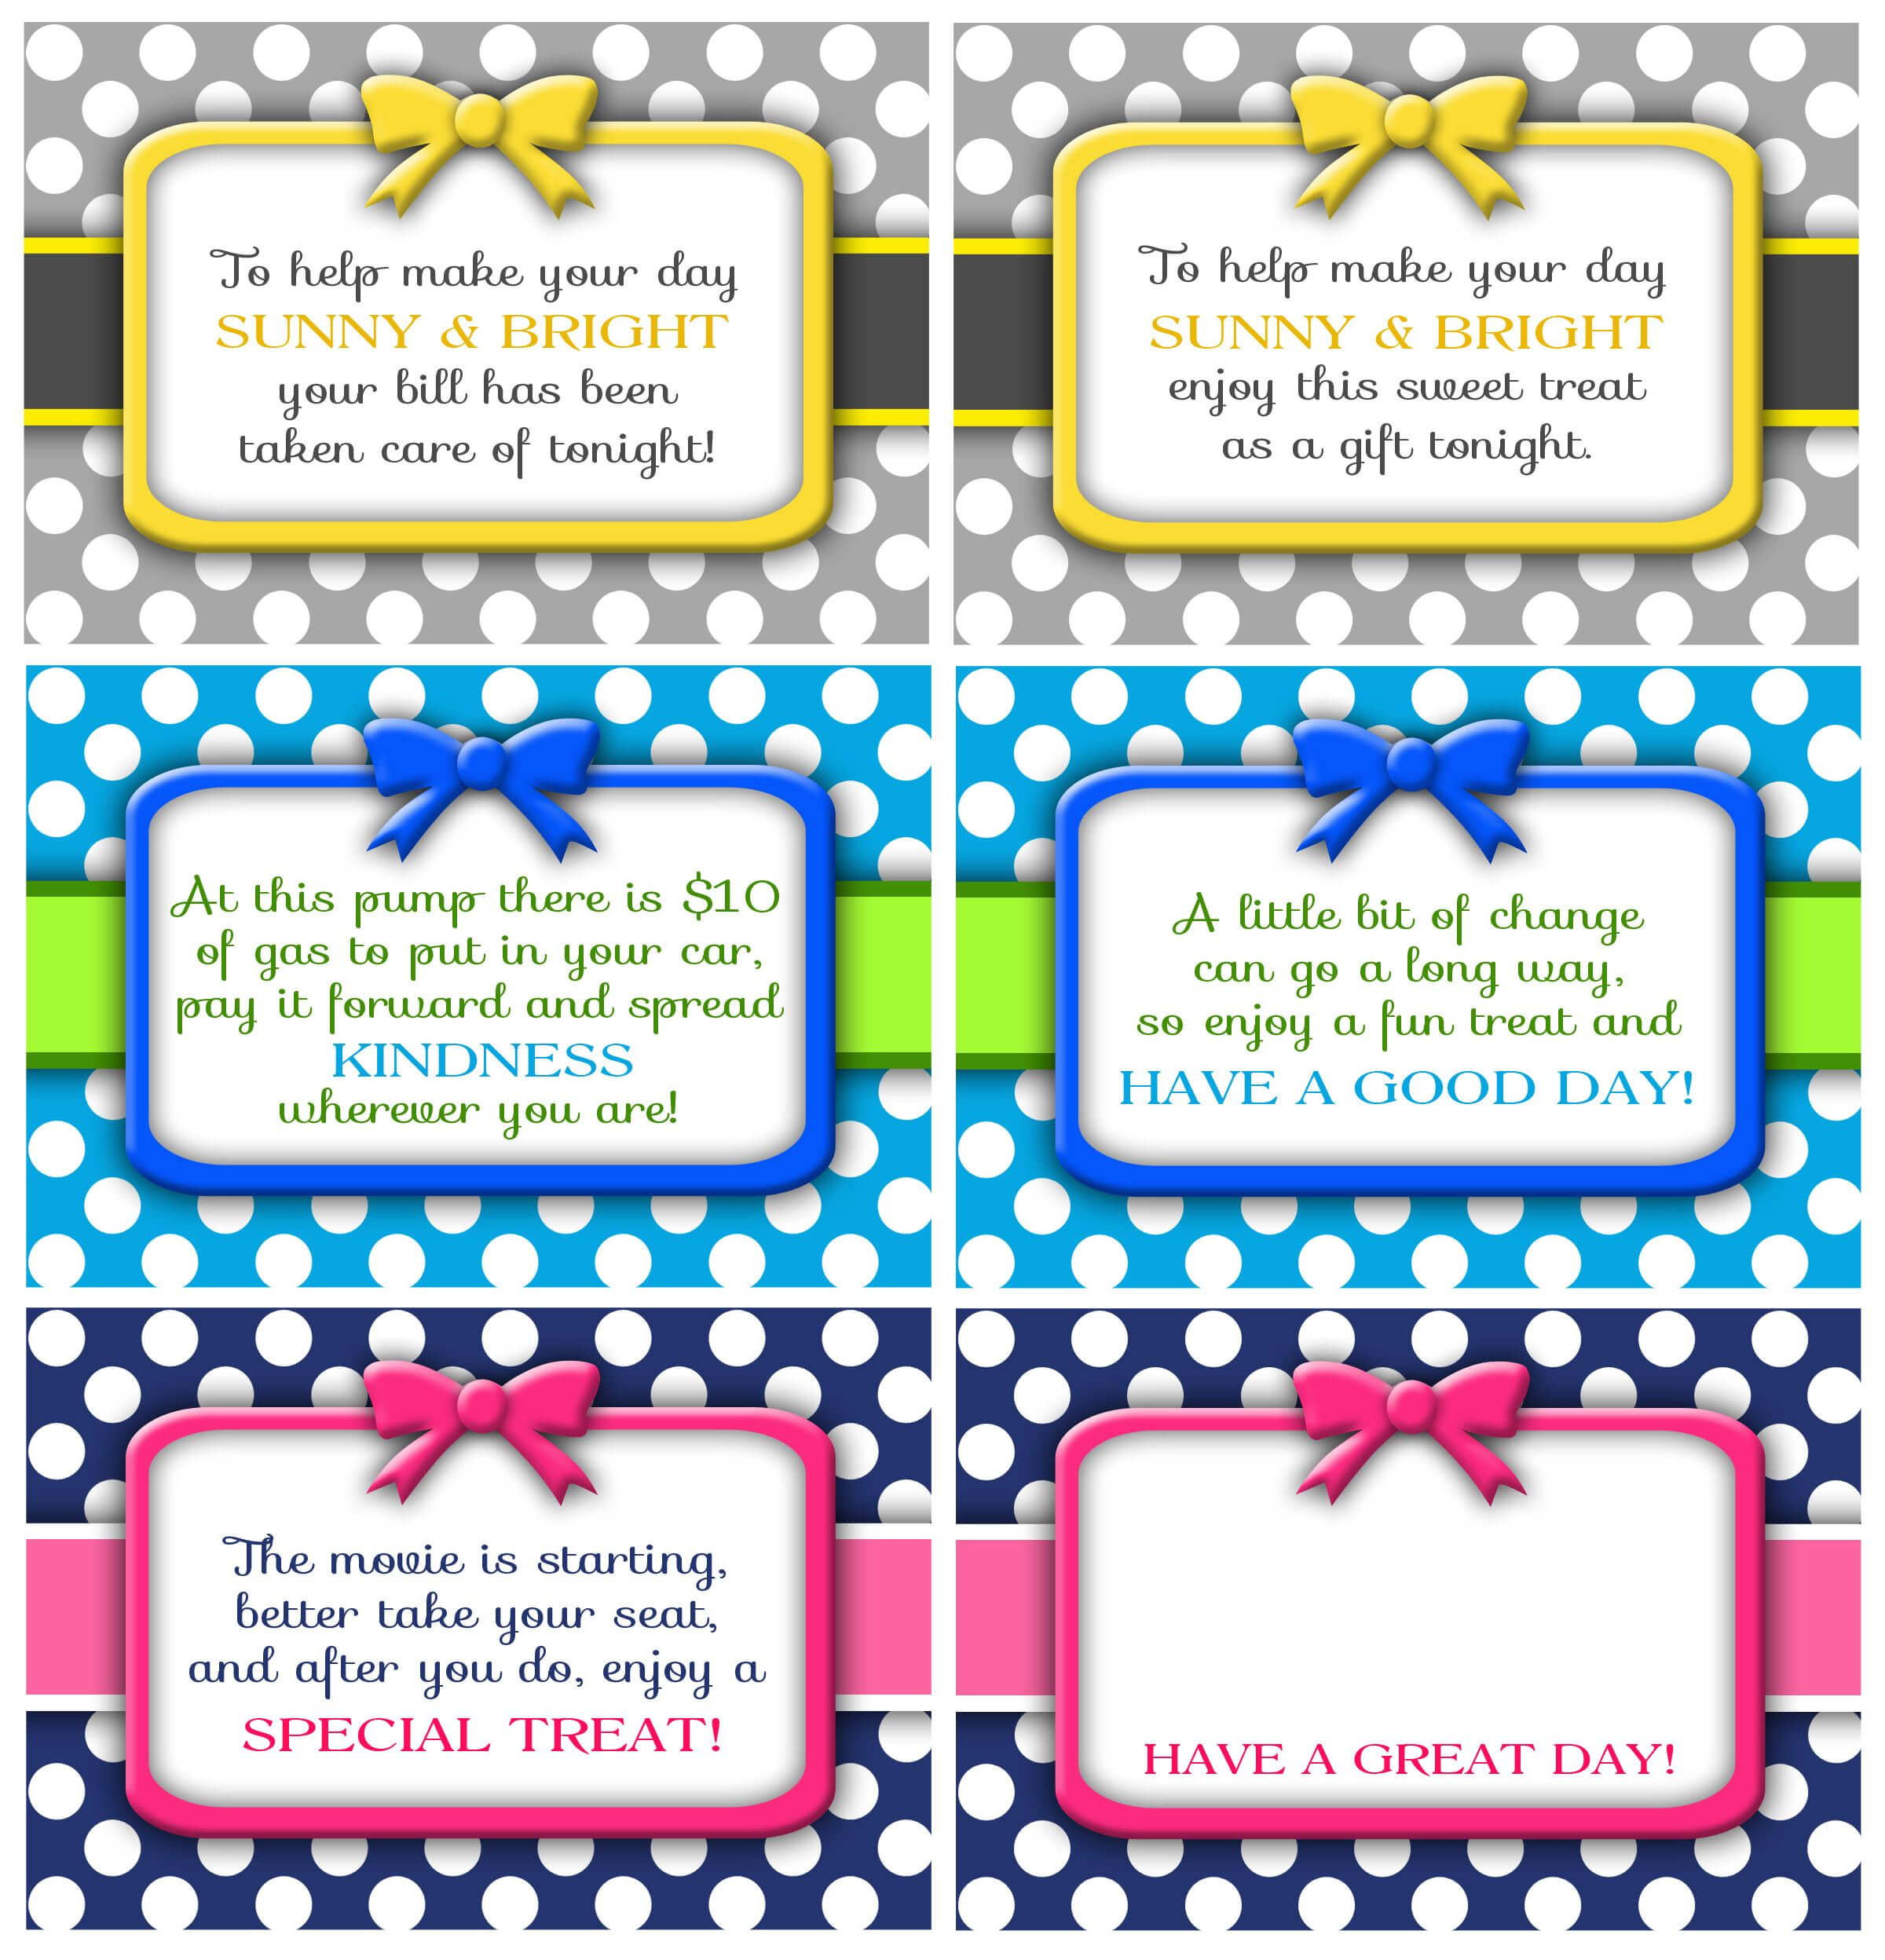 Random Acts Of Kindness Cards Kindness Notes, Gifts, Cards pertaining